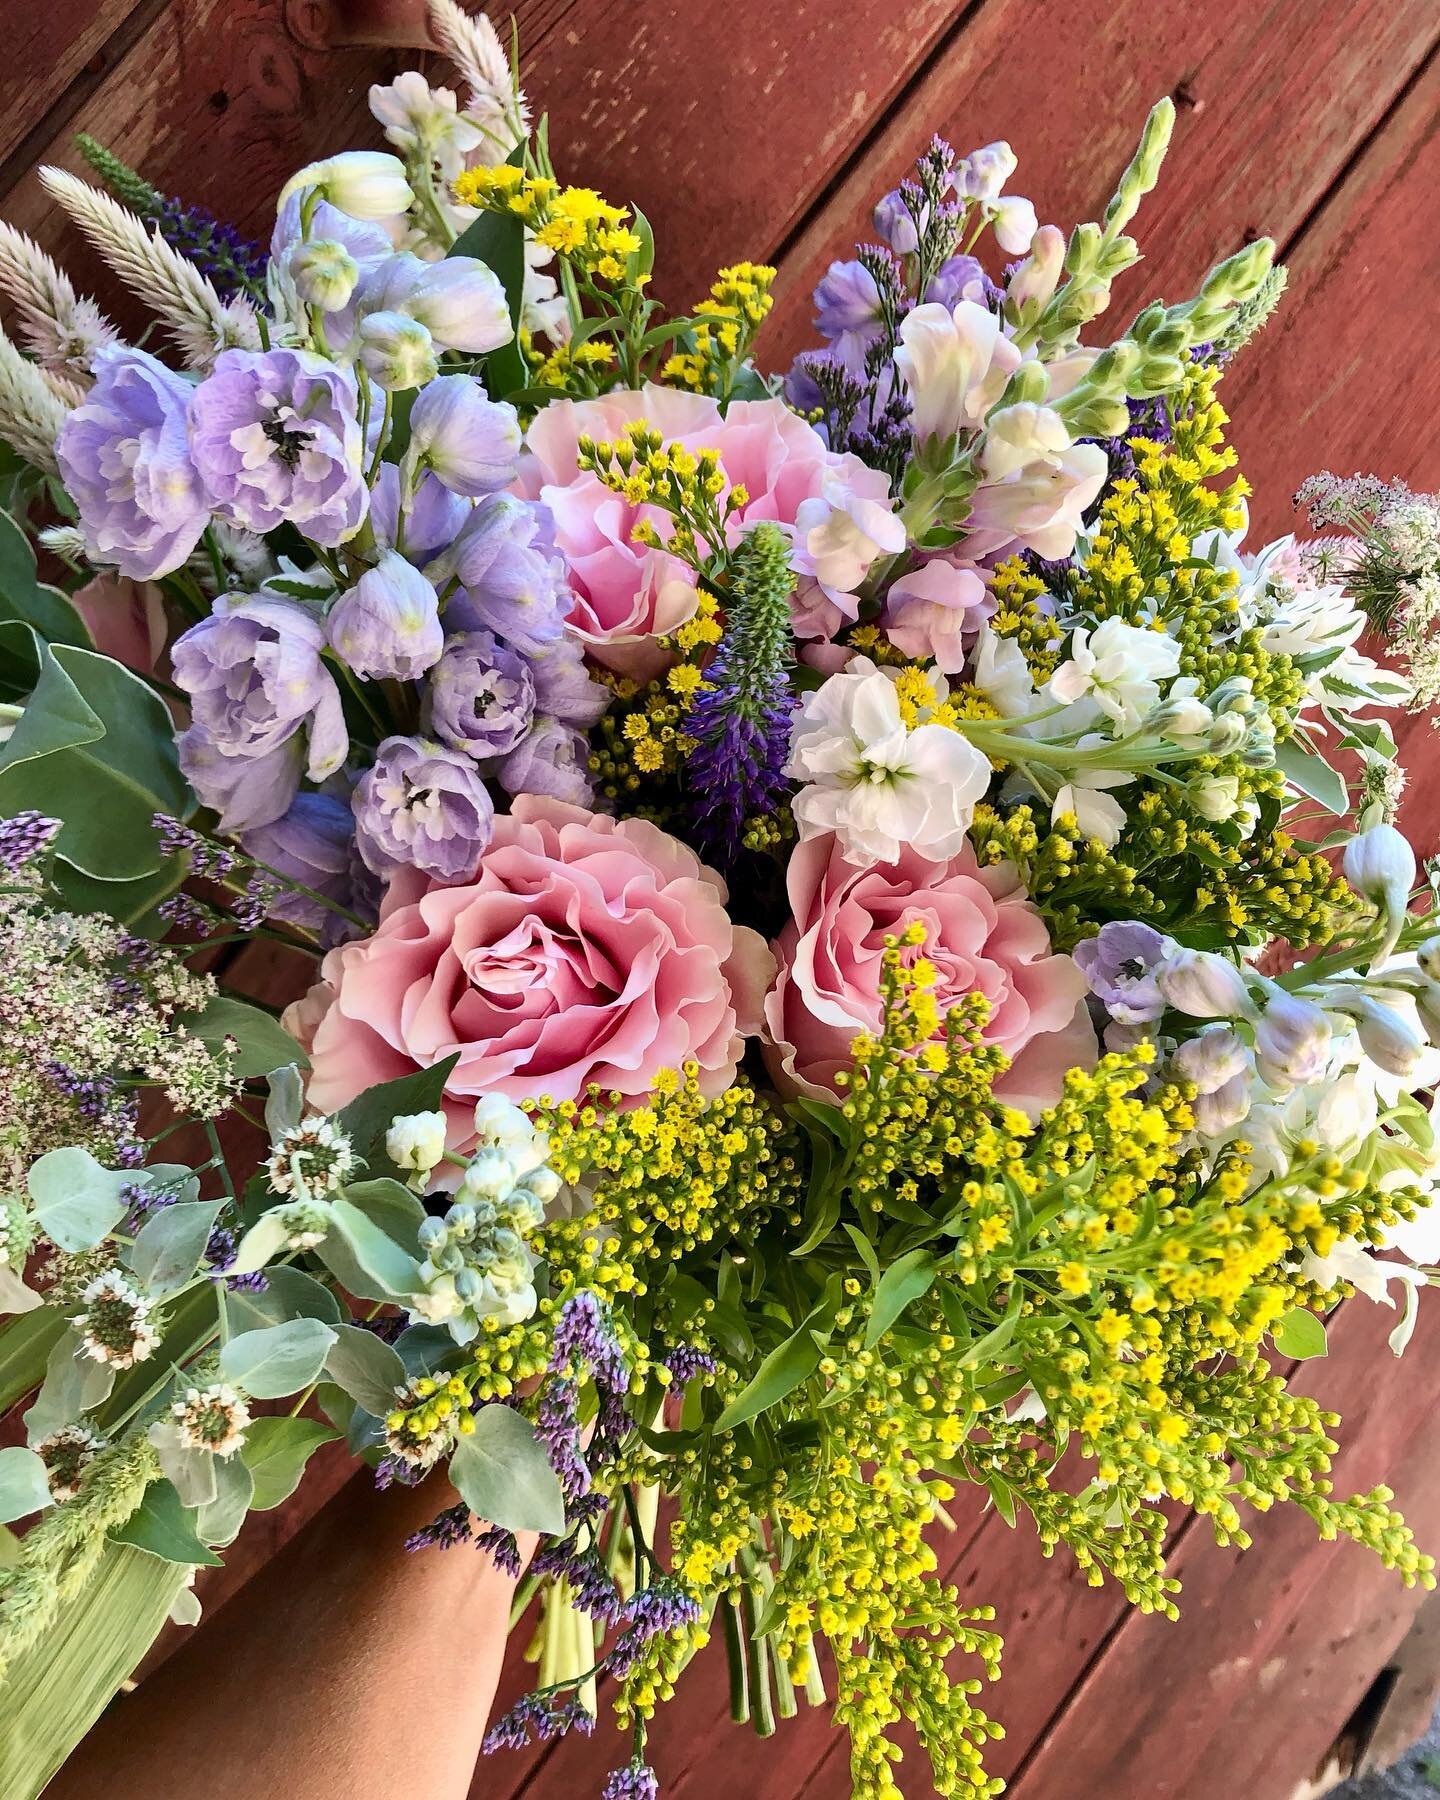 Learn how to design and plan a cutting garden that will reward you with bouquets all season long!
🌸
Sign up for my Cutting Garden Webinar; two different dates and times available for your convenience. Registration includes 2+ hours of step by step i